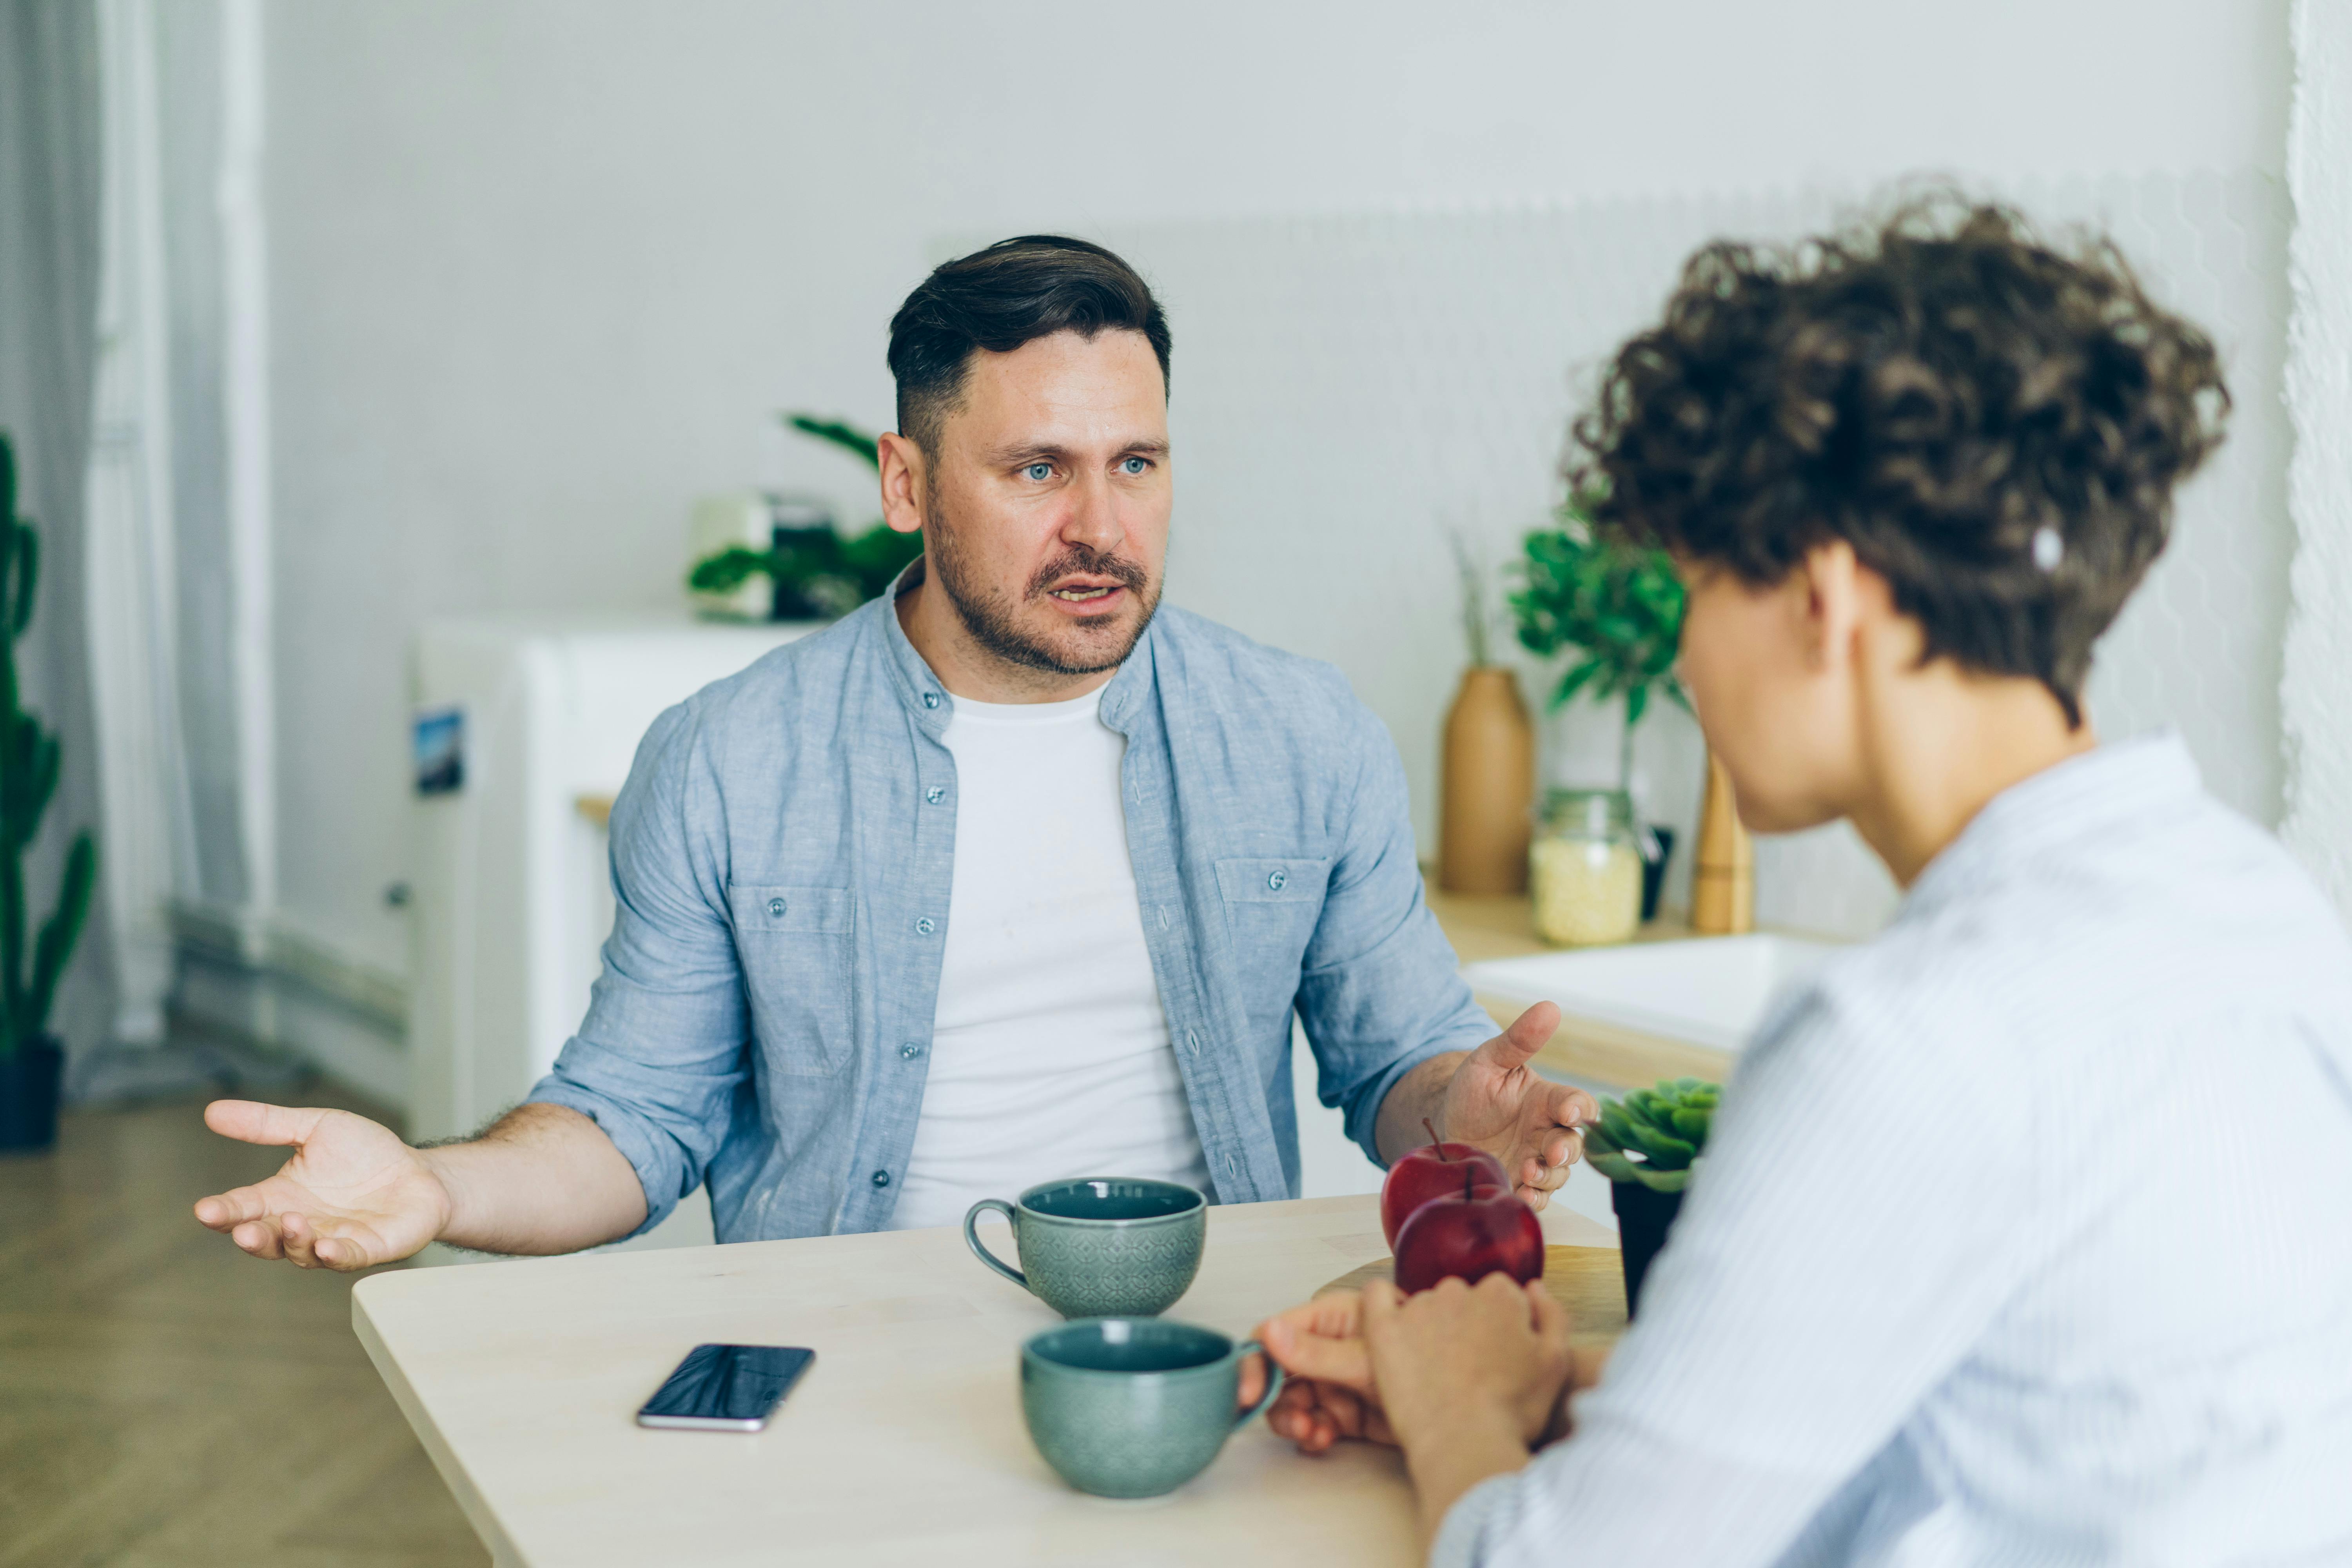 A seated couple having a disagreement | Source: Pexels